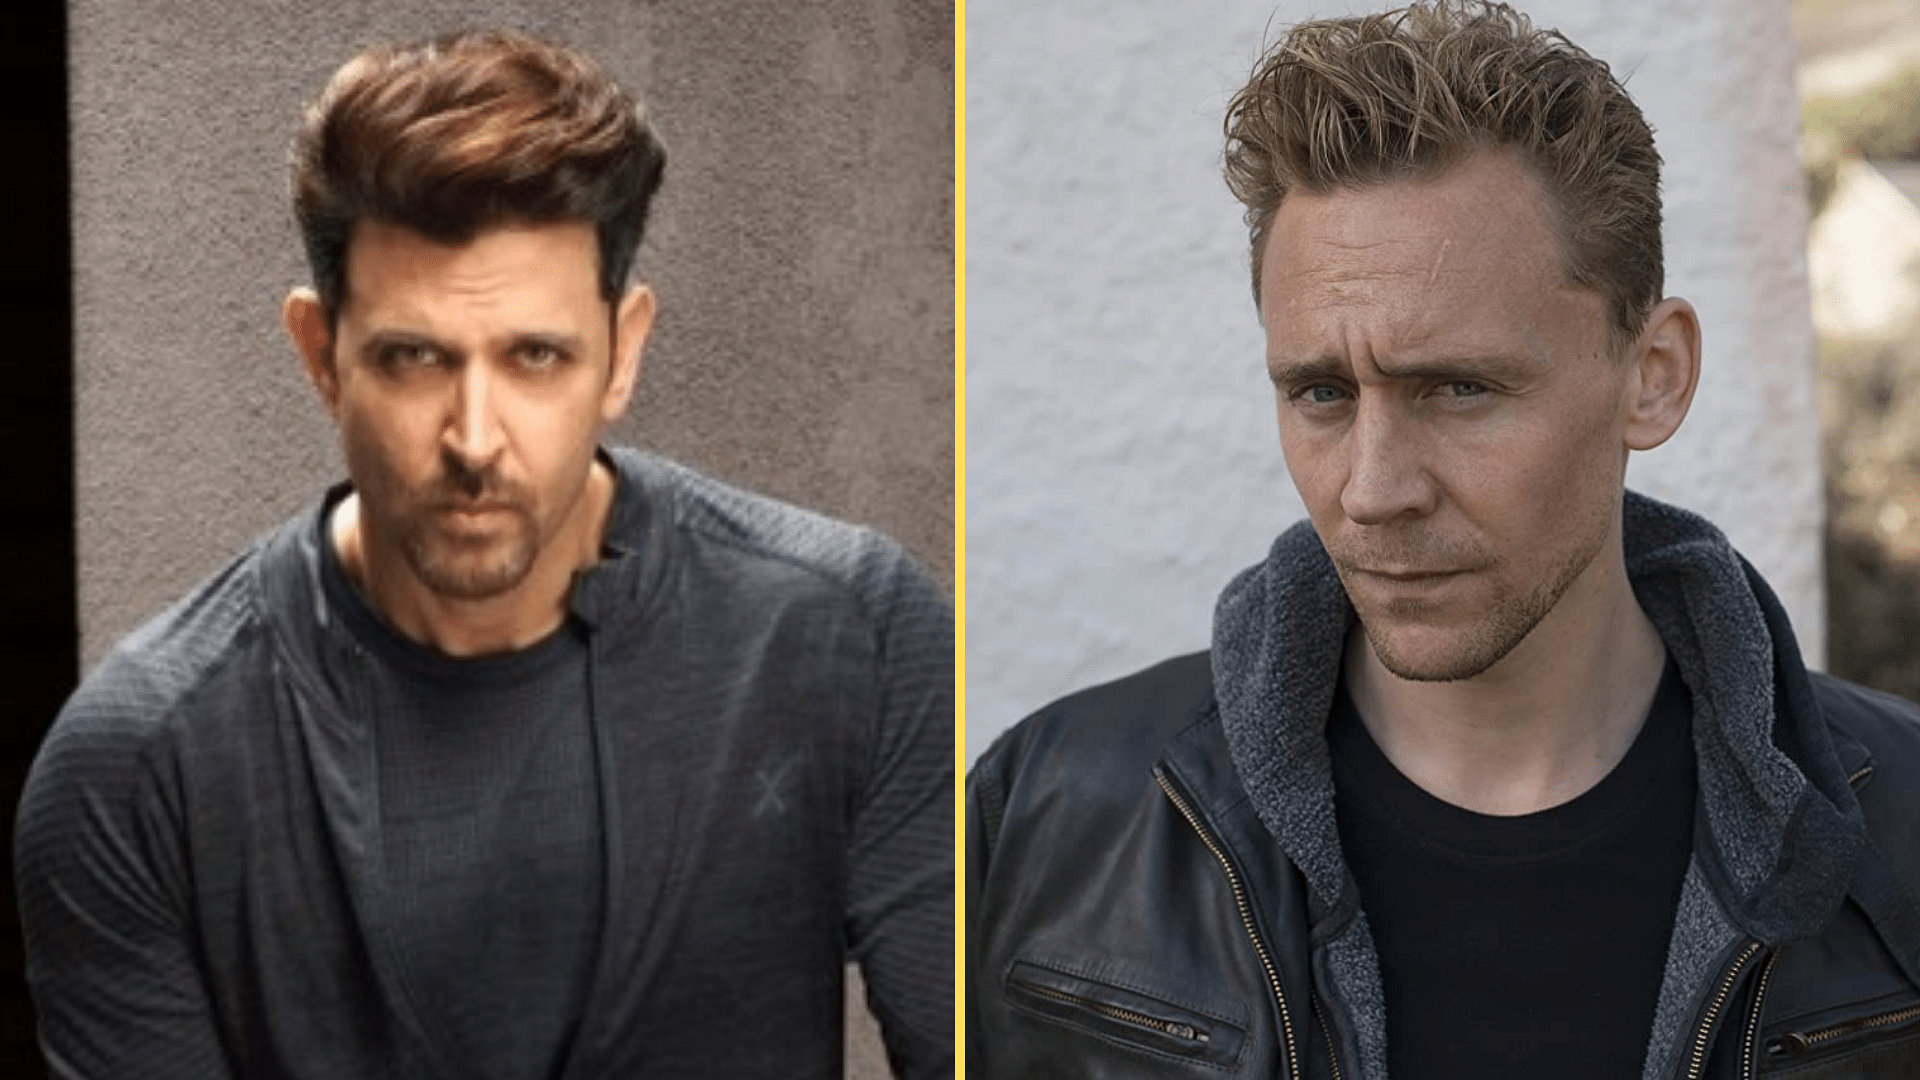 Hrithik Roshan will reportedly take up Tom Hiddleston's role in the Indian adaptation of <i>The Night Manager</i>.